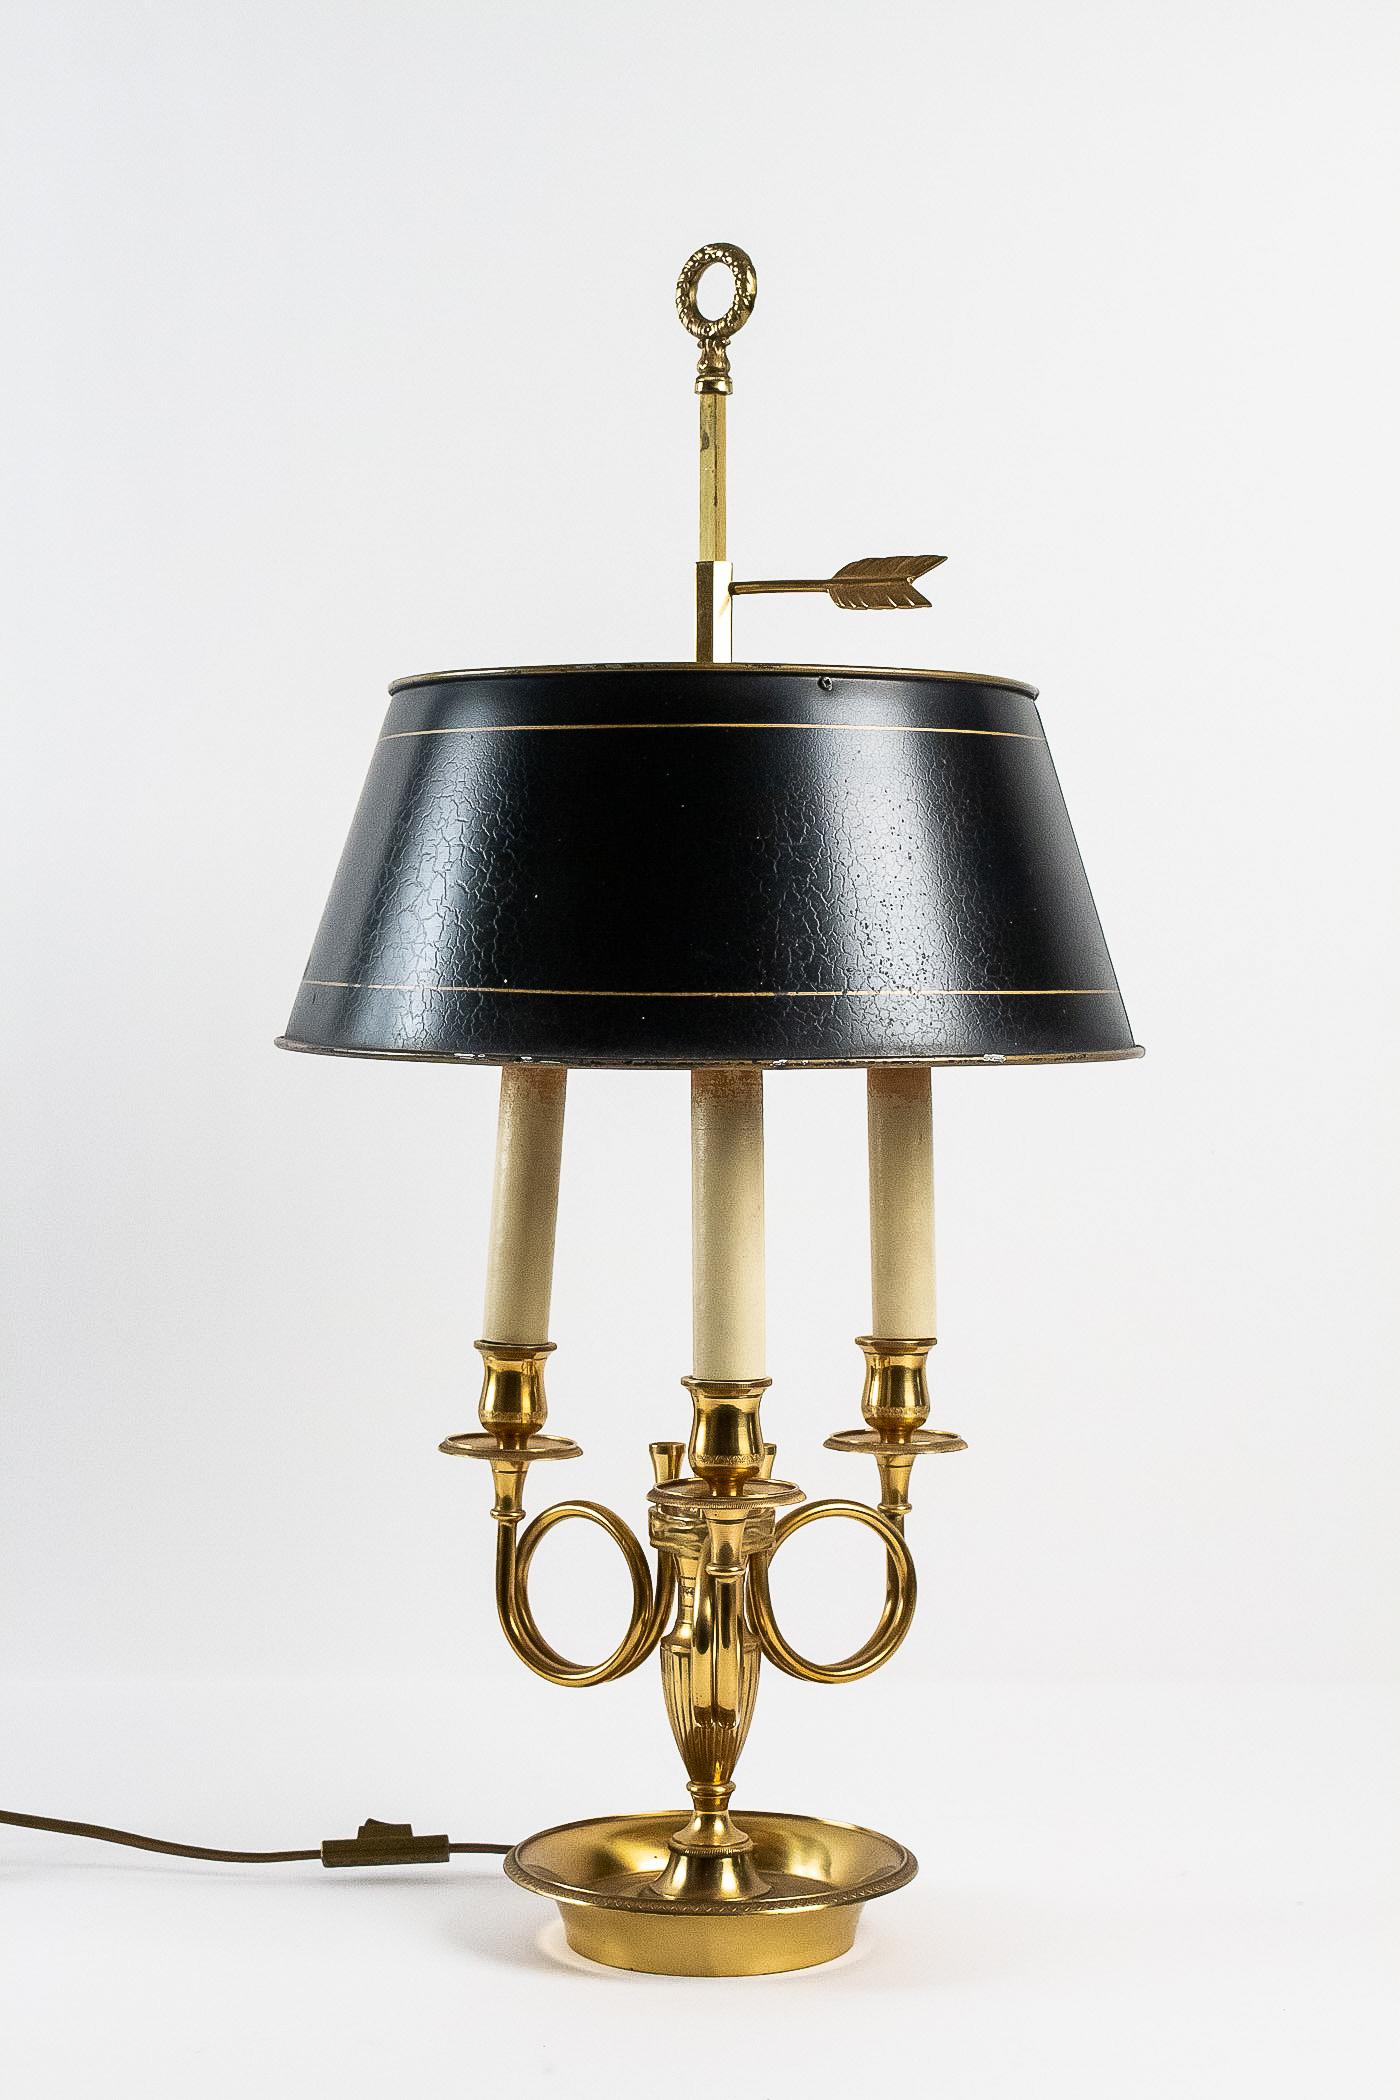 Louis XVI French 18th-Century Style Gilt-Bronze & Tole Three Lights Table Bouillotte Lamps For Sale